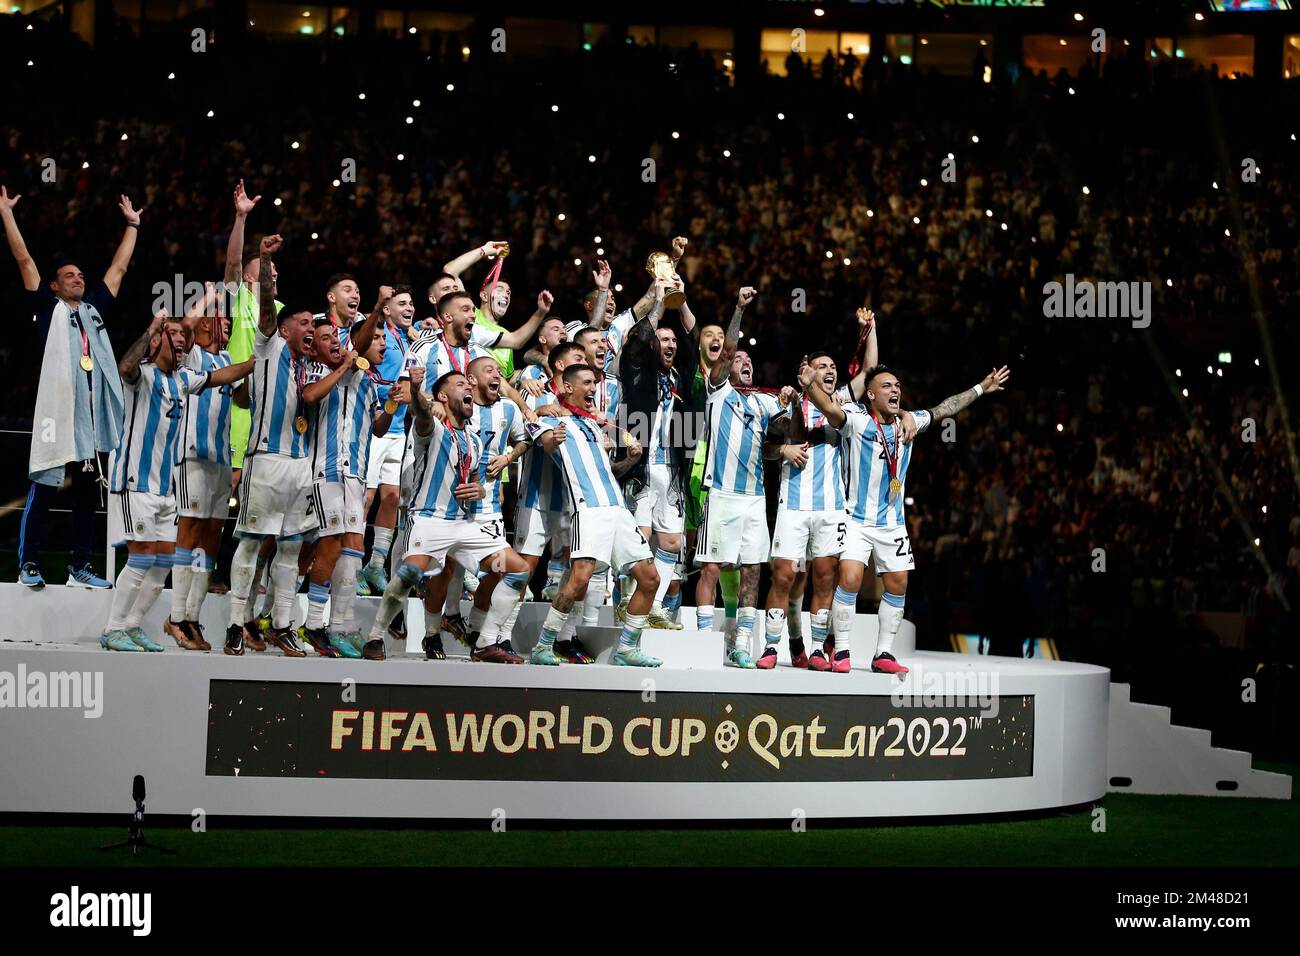 LUSAIL, QATAR - DECEMBER 18: Player of Argentina Lionel Messi celebrates with the FIFA World Cup trophy following victory over France in the FIFA World Cup Final match between Argentina and France at Lusail Stadium on December 18, 2022 in Lusail, Qatar. (Photo by Florencia Tan Jun/PxImages) Stock Photo